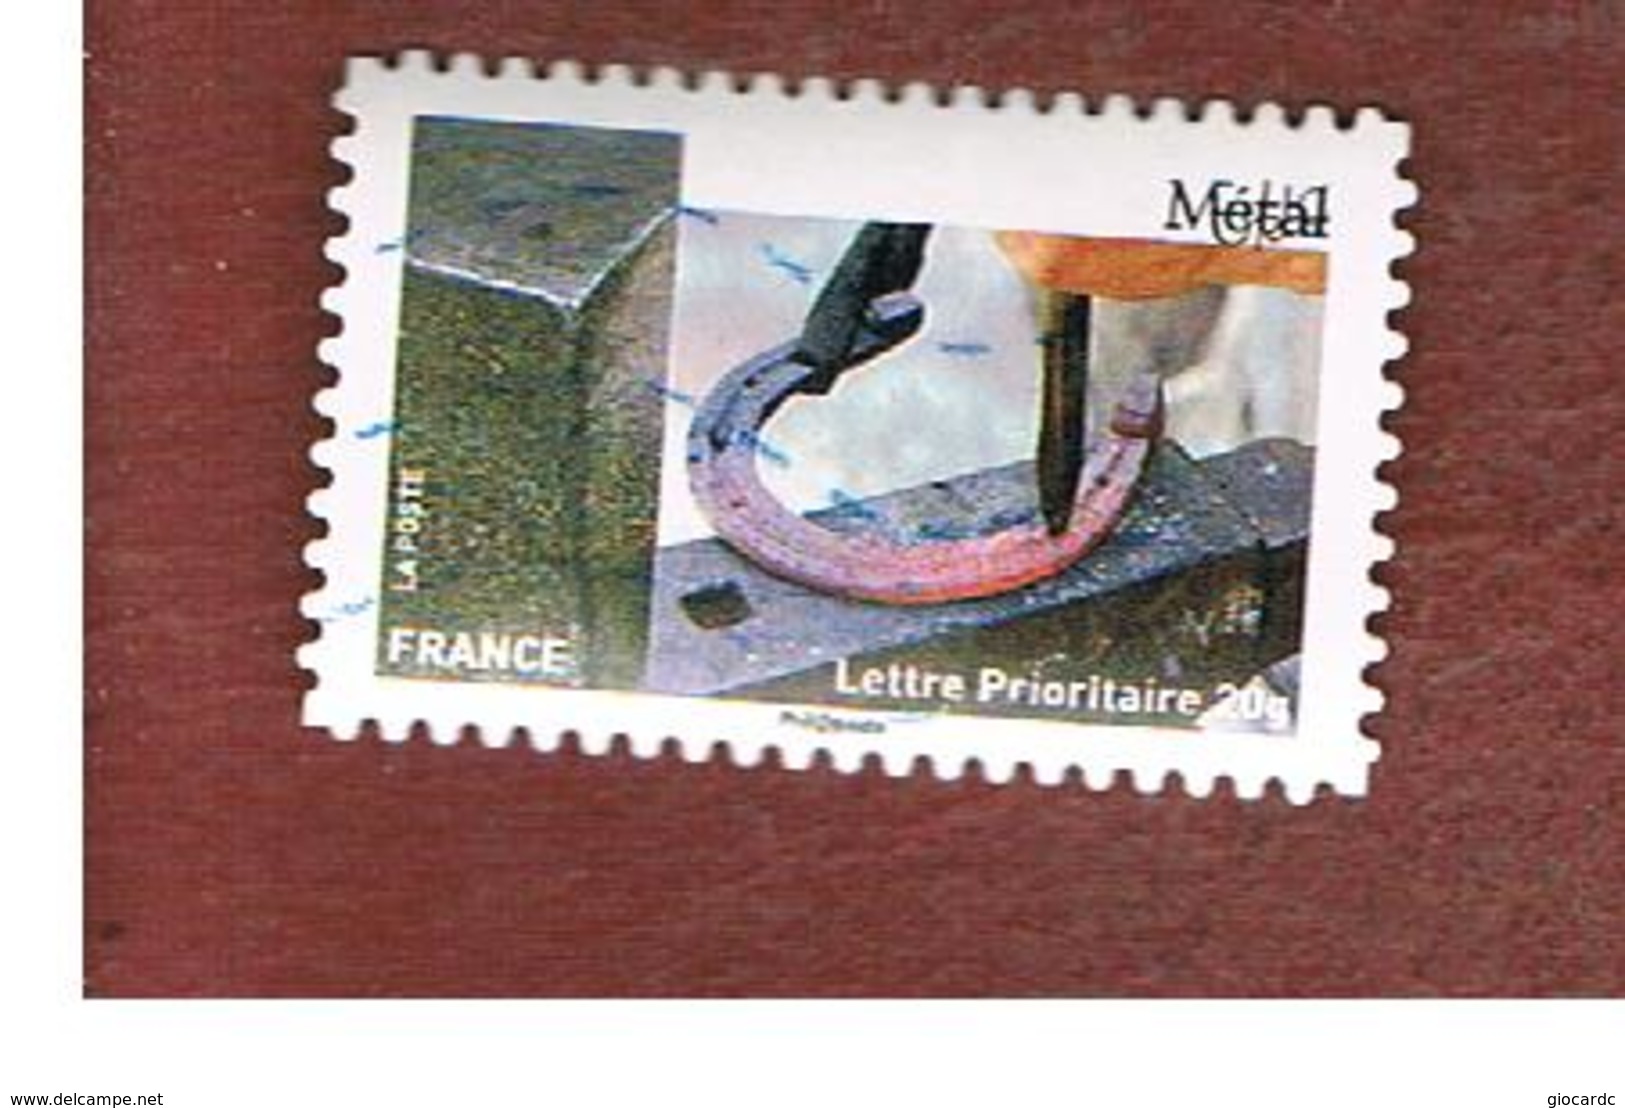 FRANCIA (FRANCE) - YV. A1072  - 2015 HANDICRAFT: METAL  - USED - Used Stamps